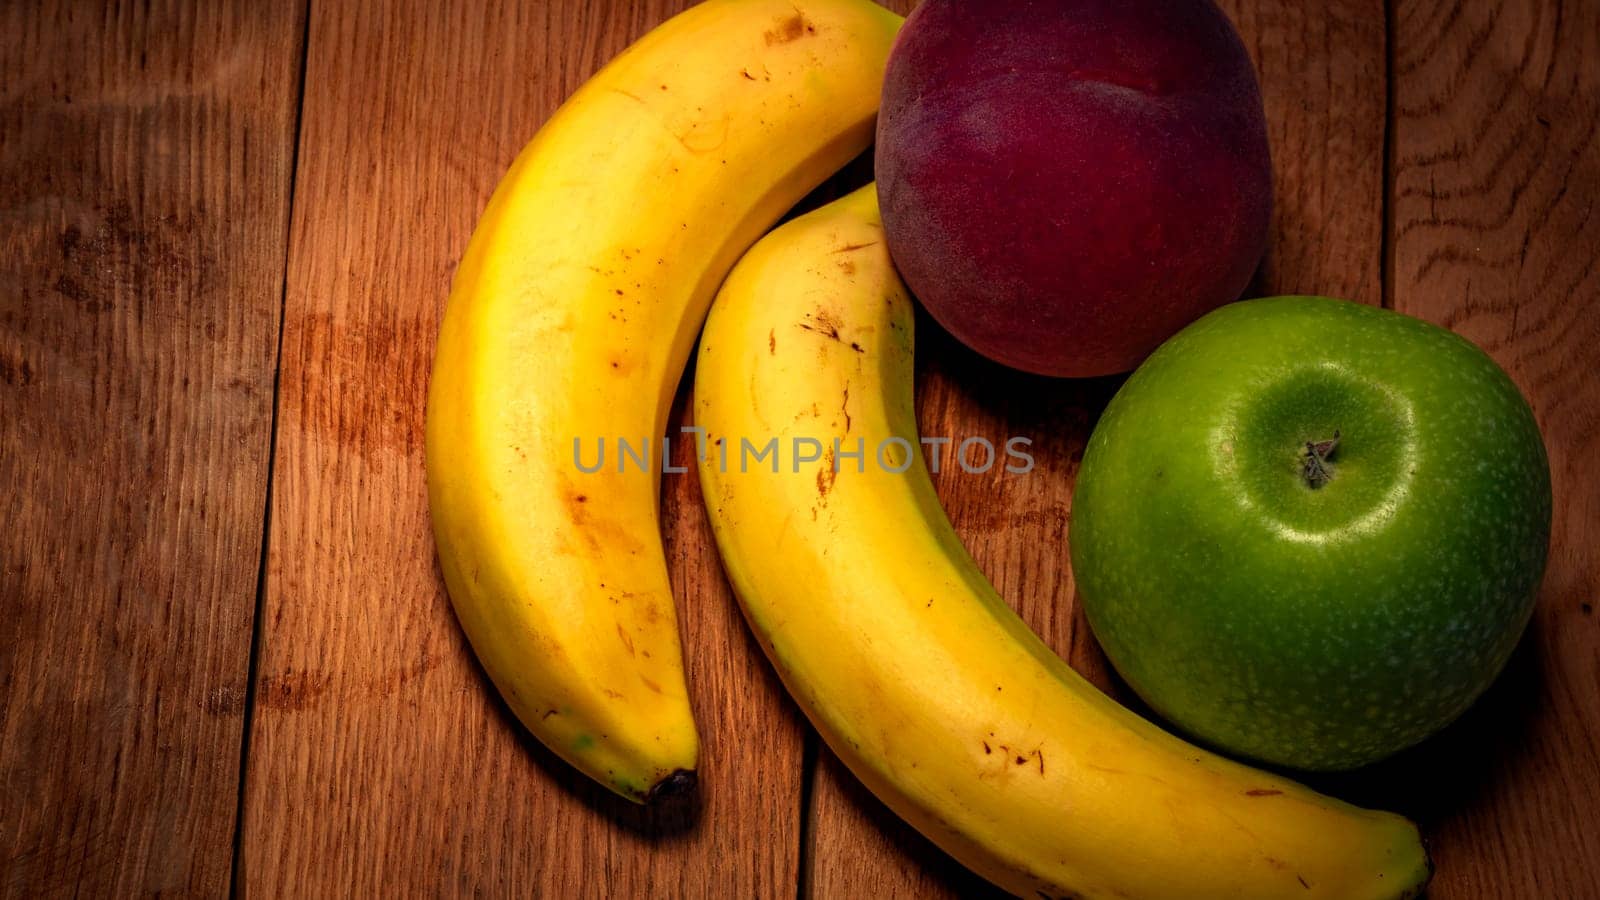 Apple, peach and bananas on a wooden board. Composition of healty fruits. by vladispas